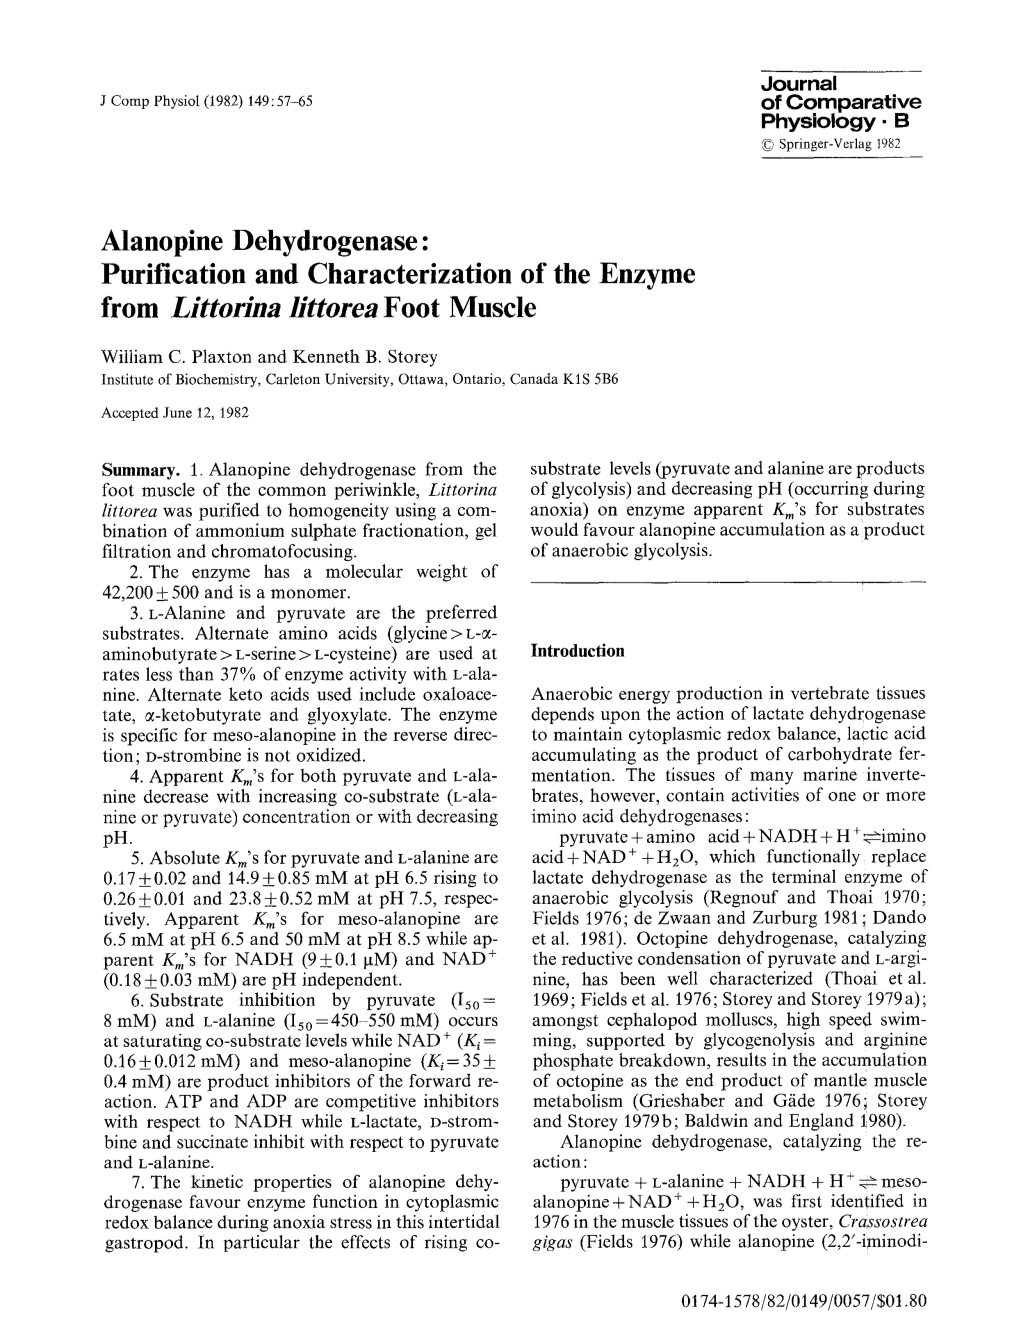 Alanopine Dehydrogenase: Purification and Characterization of the Enzyme from Littorina Littorea Foot Muscle